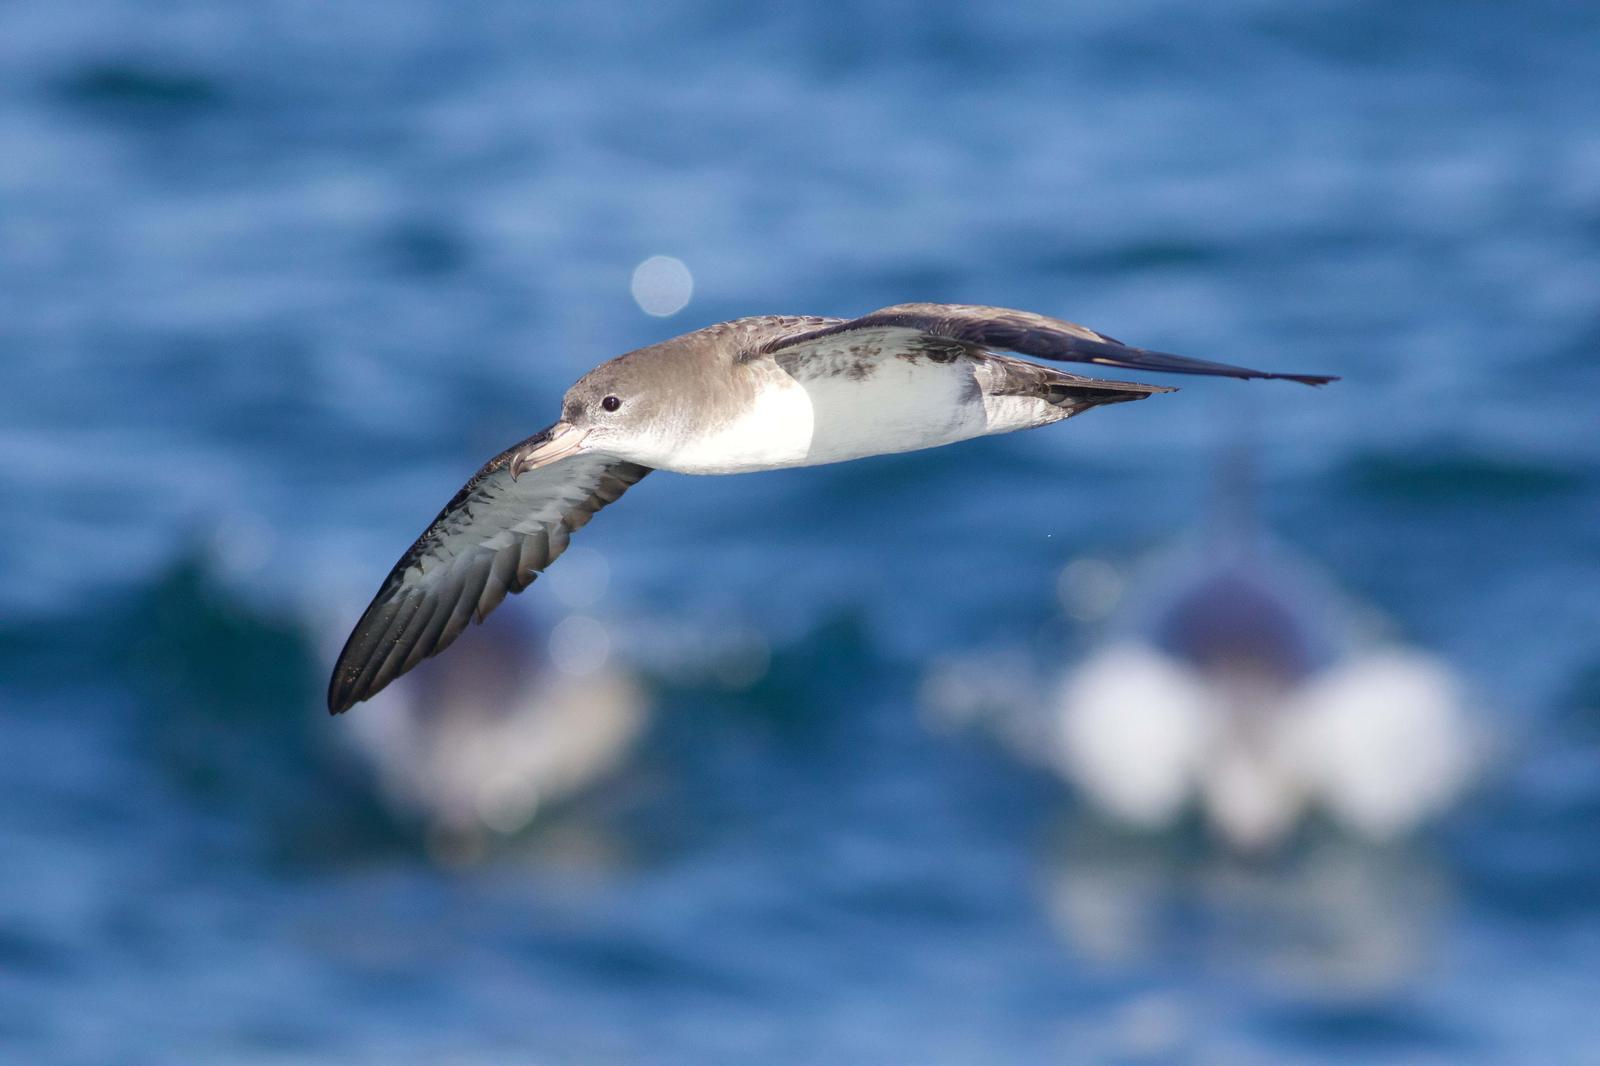 Pink-footed Shearwater Photo by Tom Ford-Hutchinson